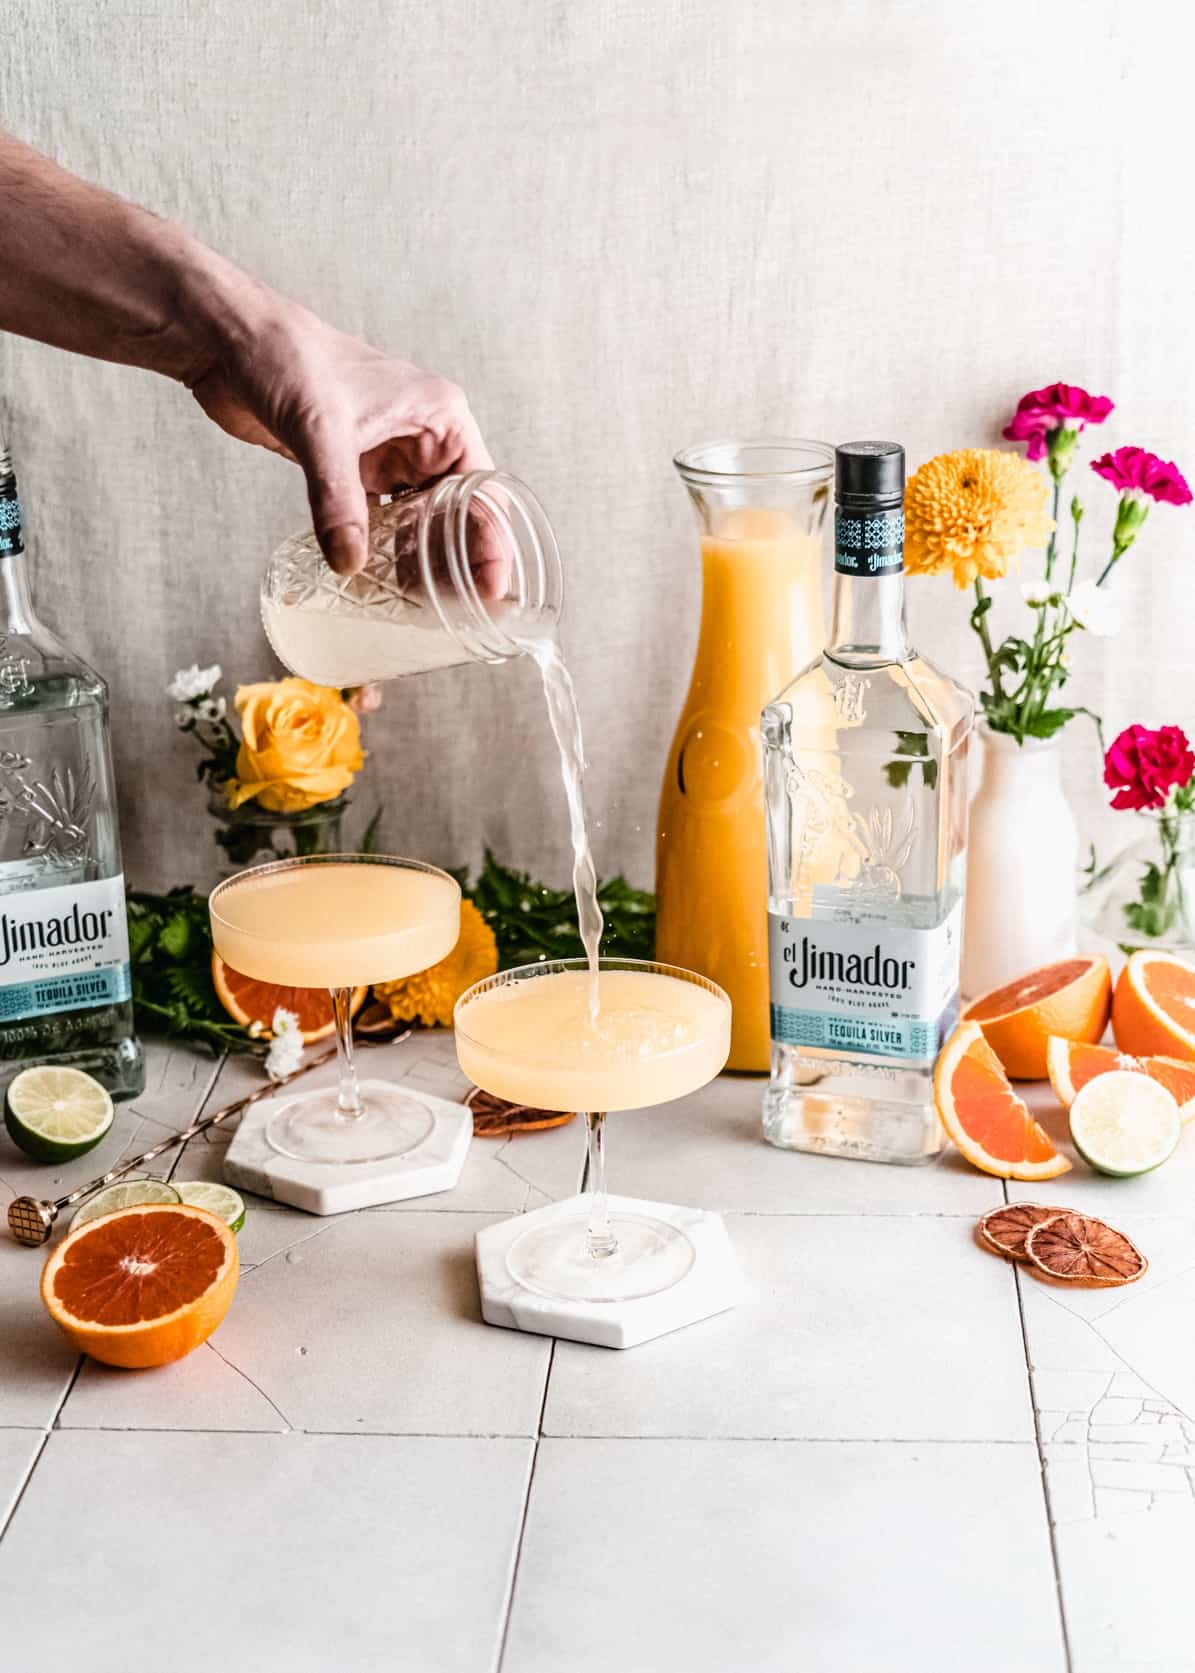 Ginger beer being poured from cocktail shaker into cocktail glass.  Tequila bottle, orange juice and flowers in the background